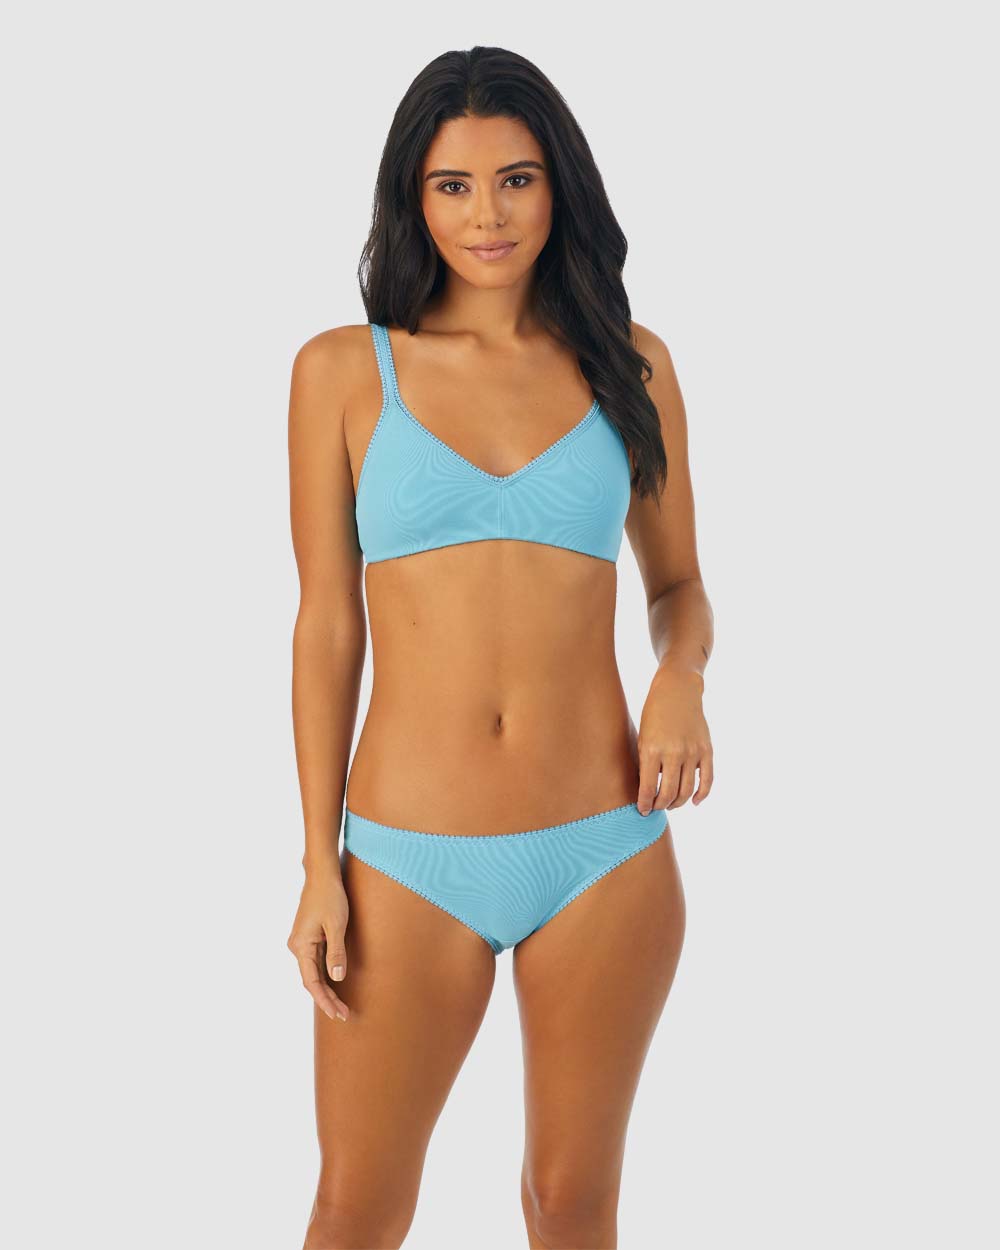 A lady wearing turquoise sea cabana cotton bralette.